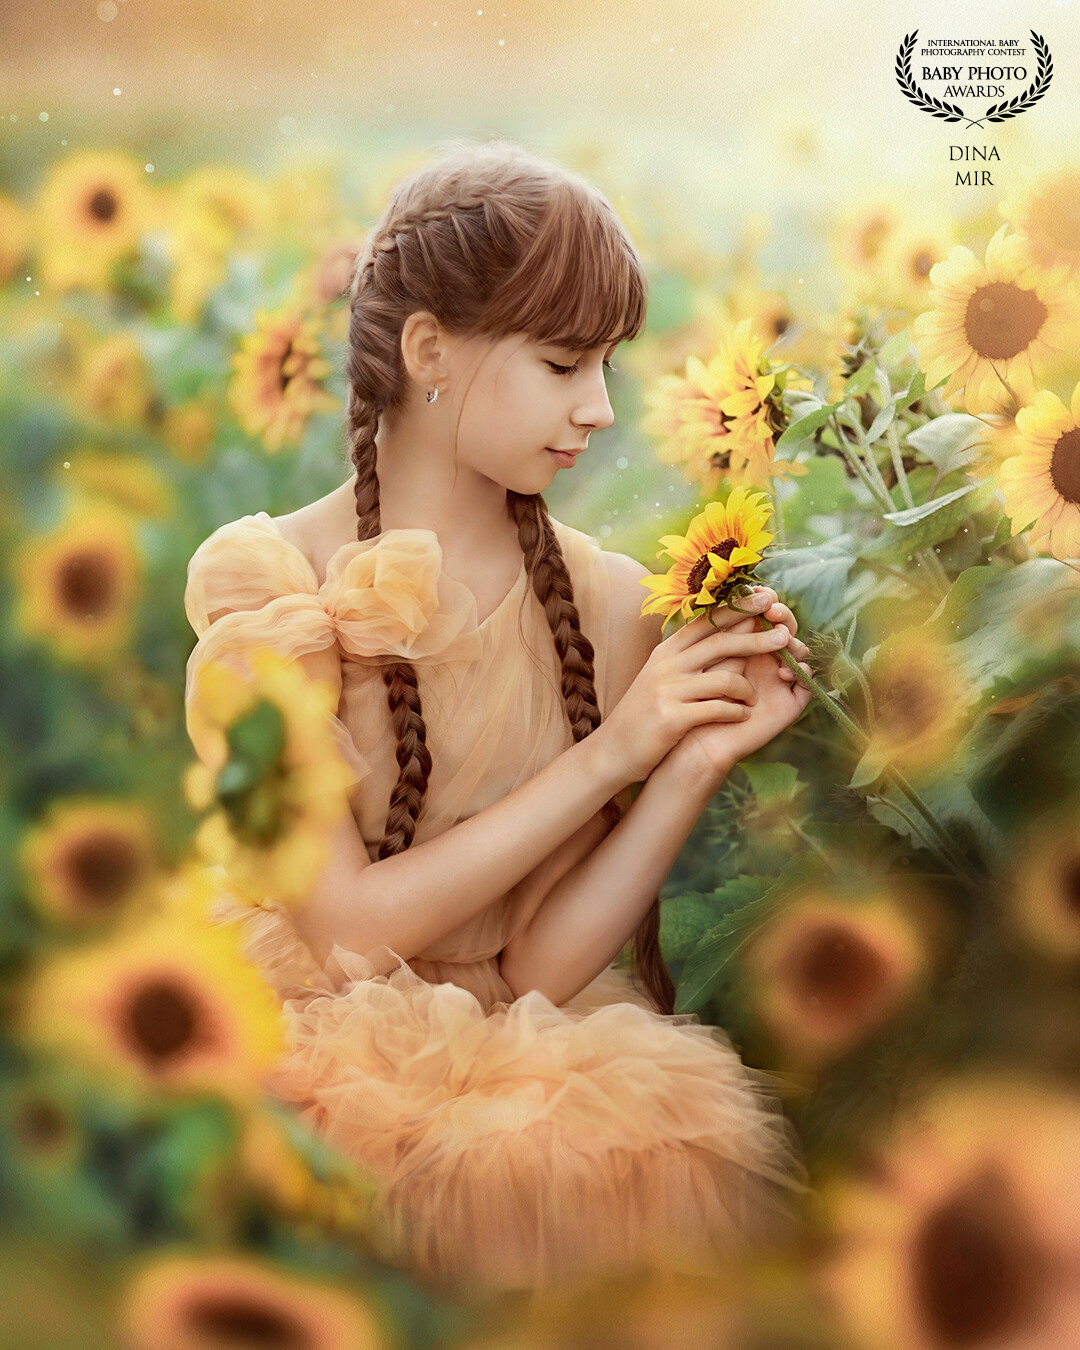 There is a lot of light and heat in the fields with sunflowers.<br />
 These sunny flowers bring joy and a wonderful summer mood.